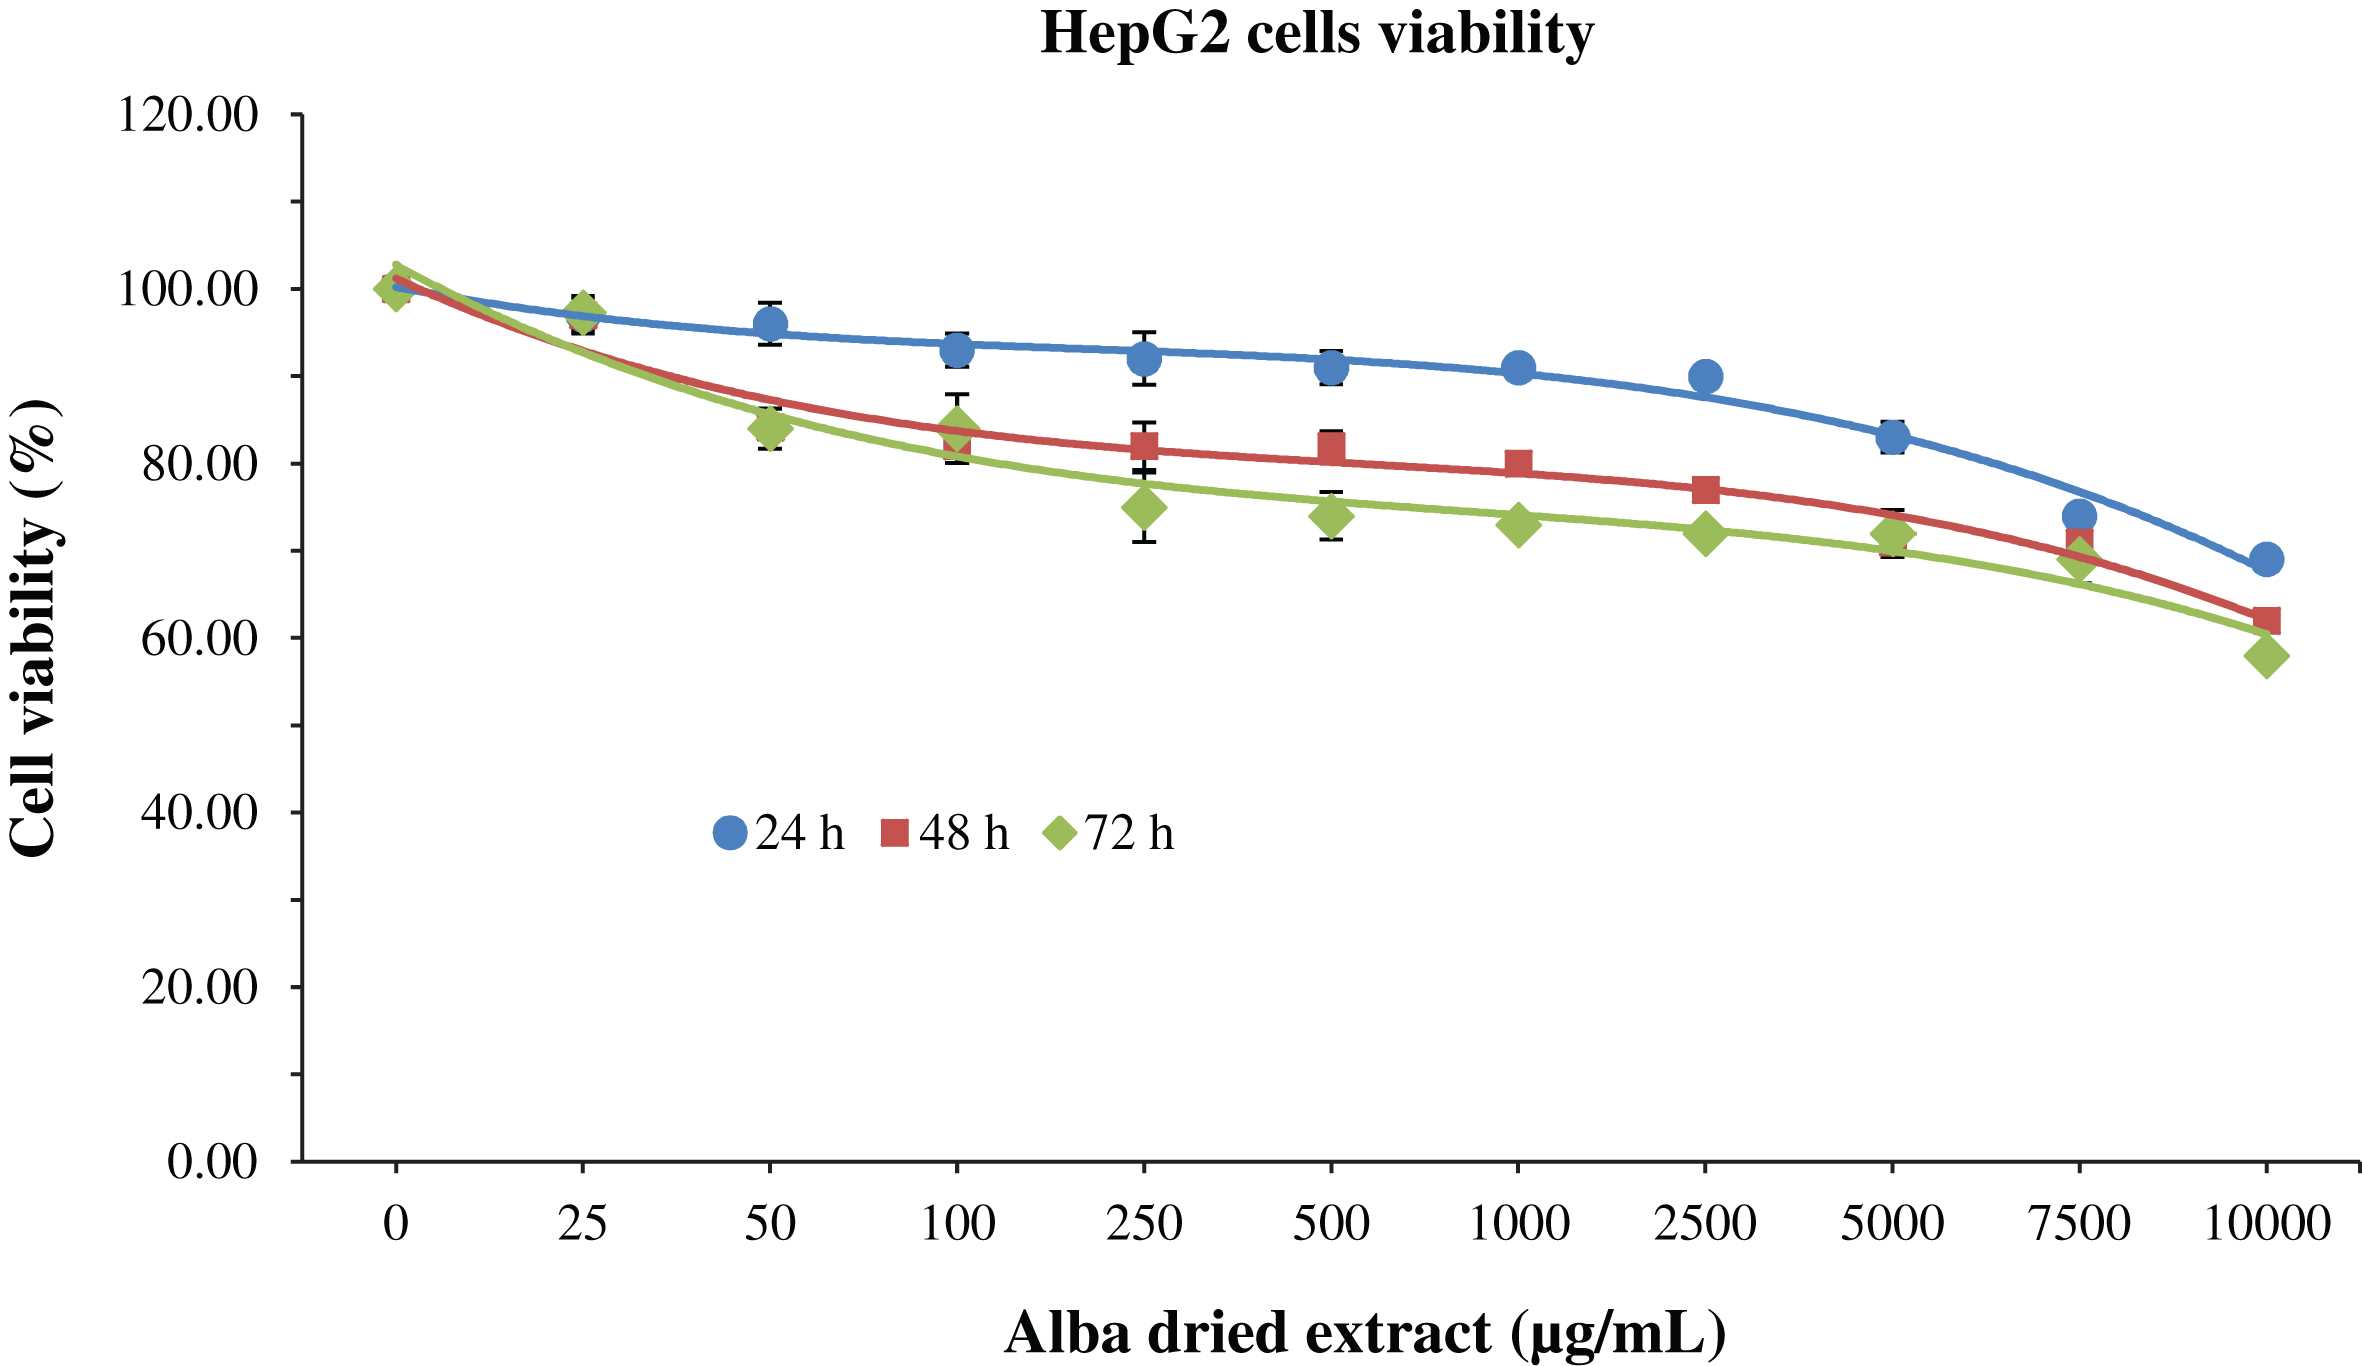 MTT assay for the determination of cell viability in HepG2 cells treated with different time-concentrations of strawberry extracts. Data are expressed as mean values±SD. Values belonging to the same set of data with different superscript letters are significantly different (p < 0.05).